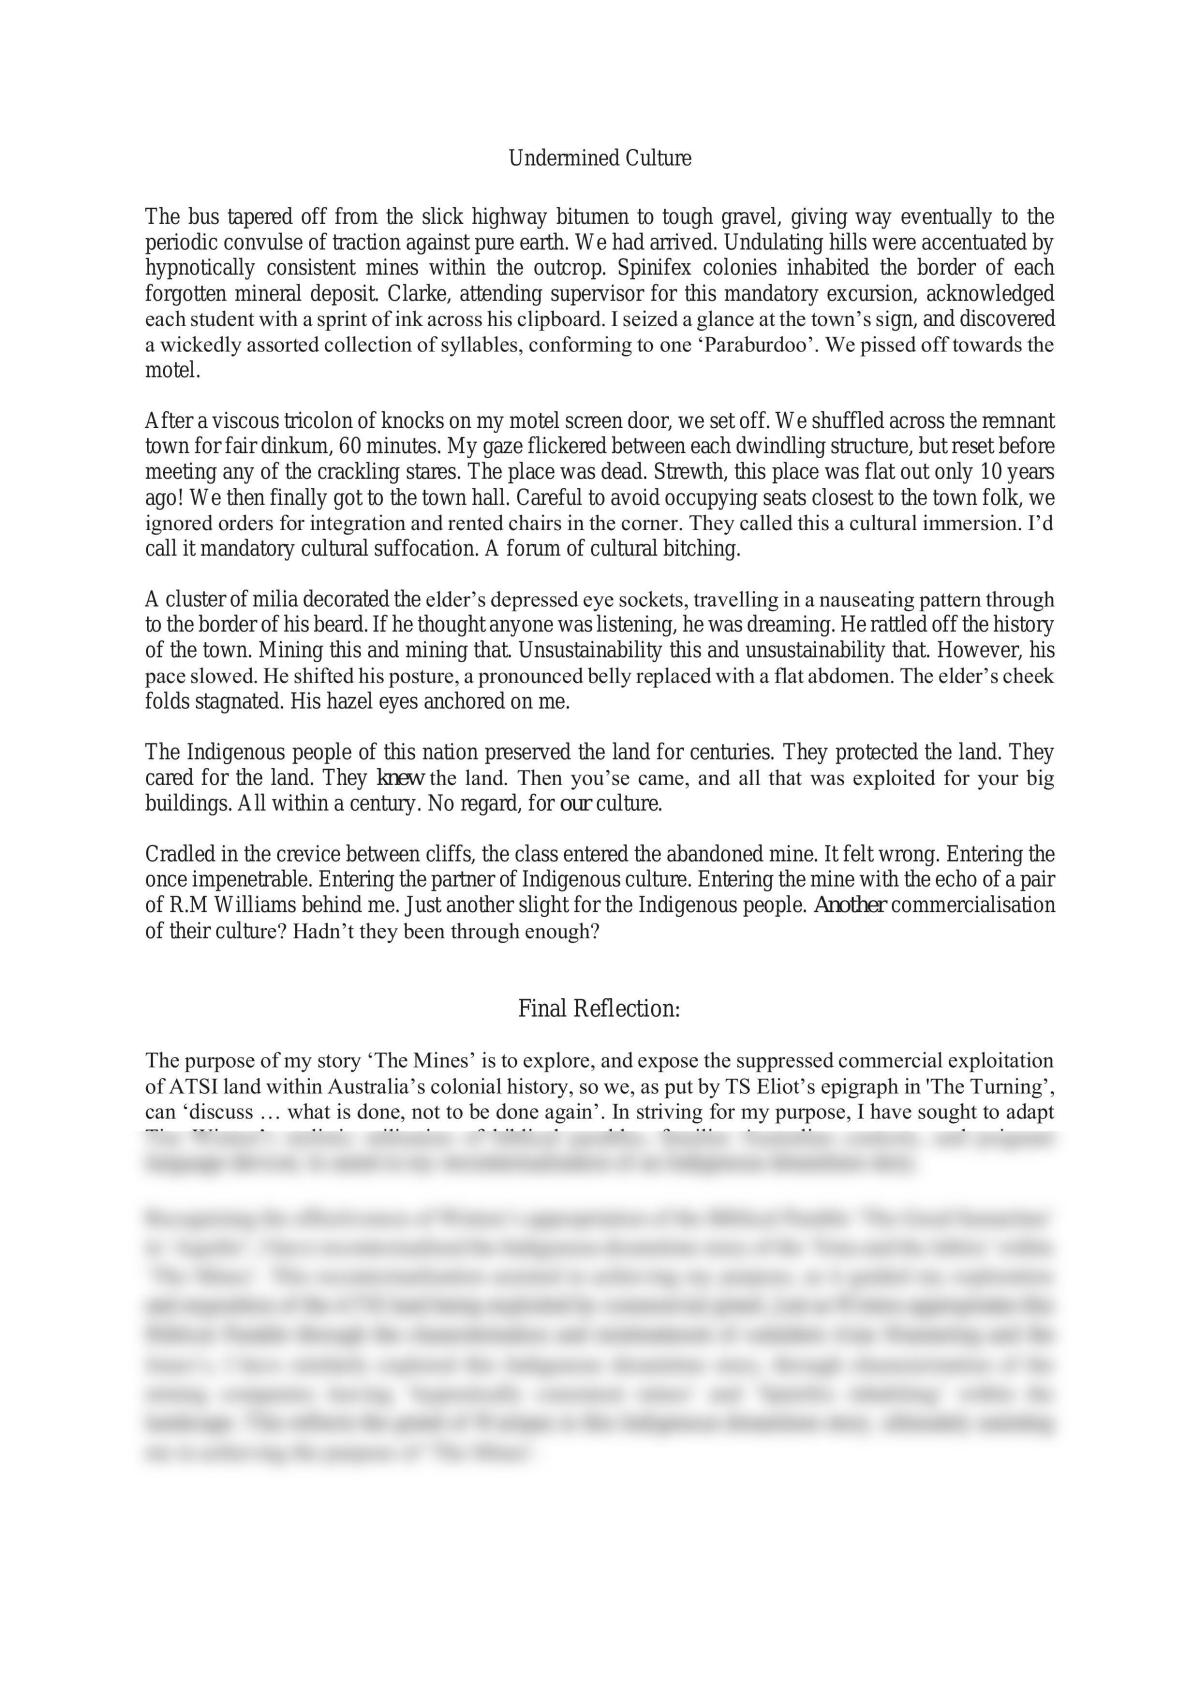 Full Mark Relfection and Narrative - Page 1